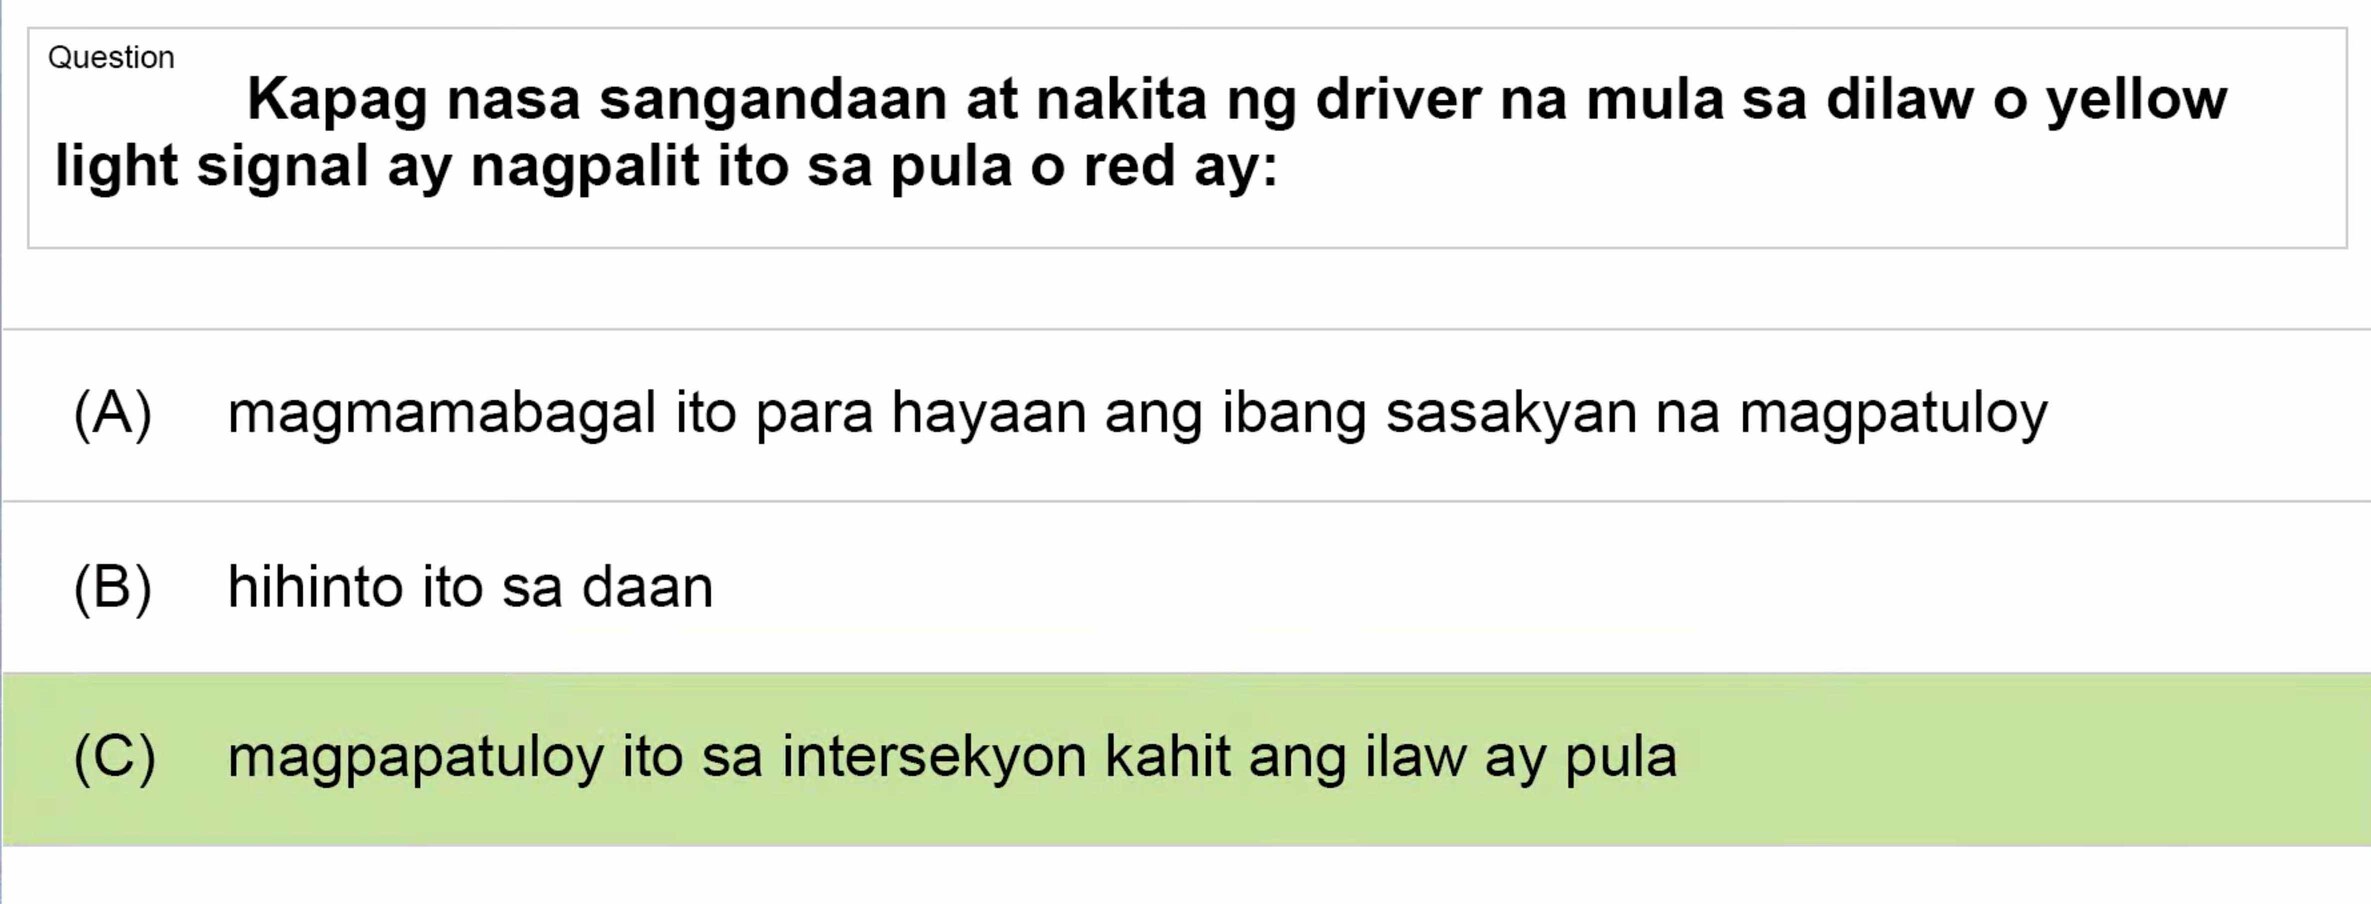 LTO Tagalog non professional exam reviewer motorcycle 1 (23)